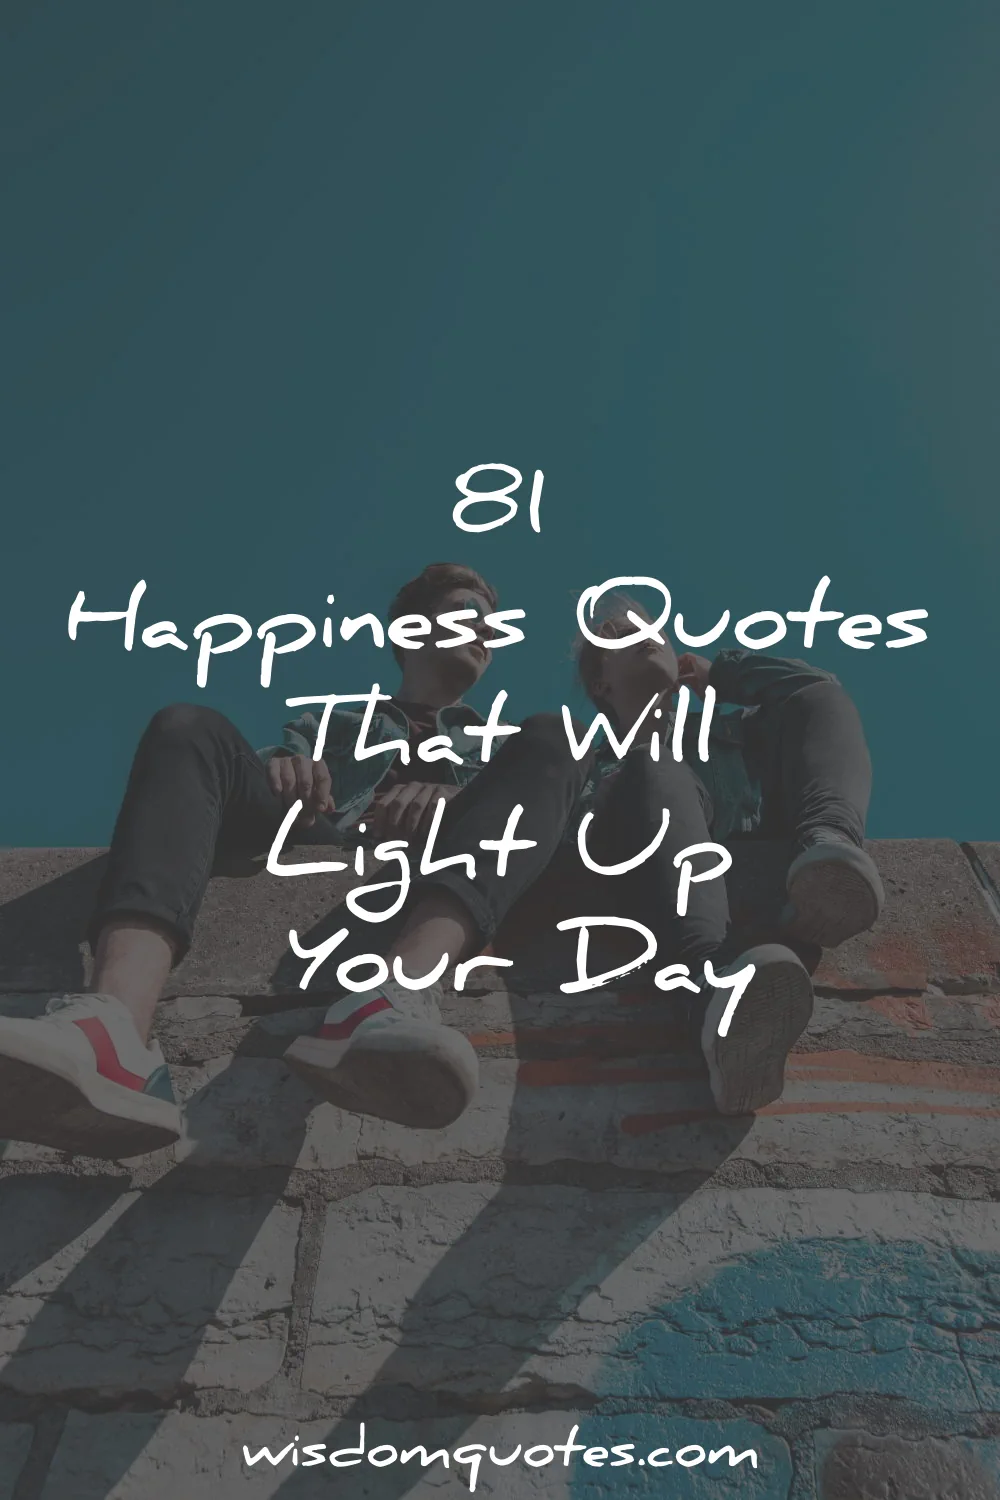 happiness quotes light up your day wisdom